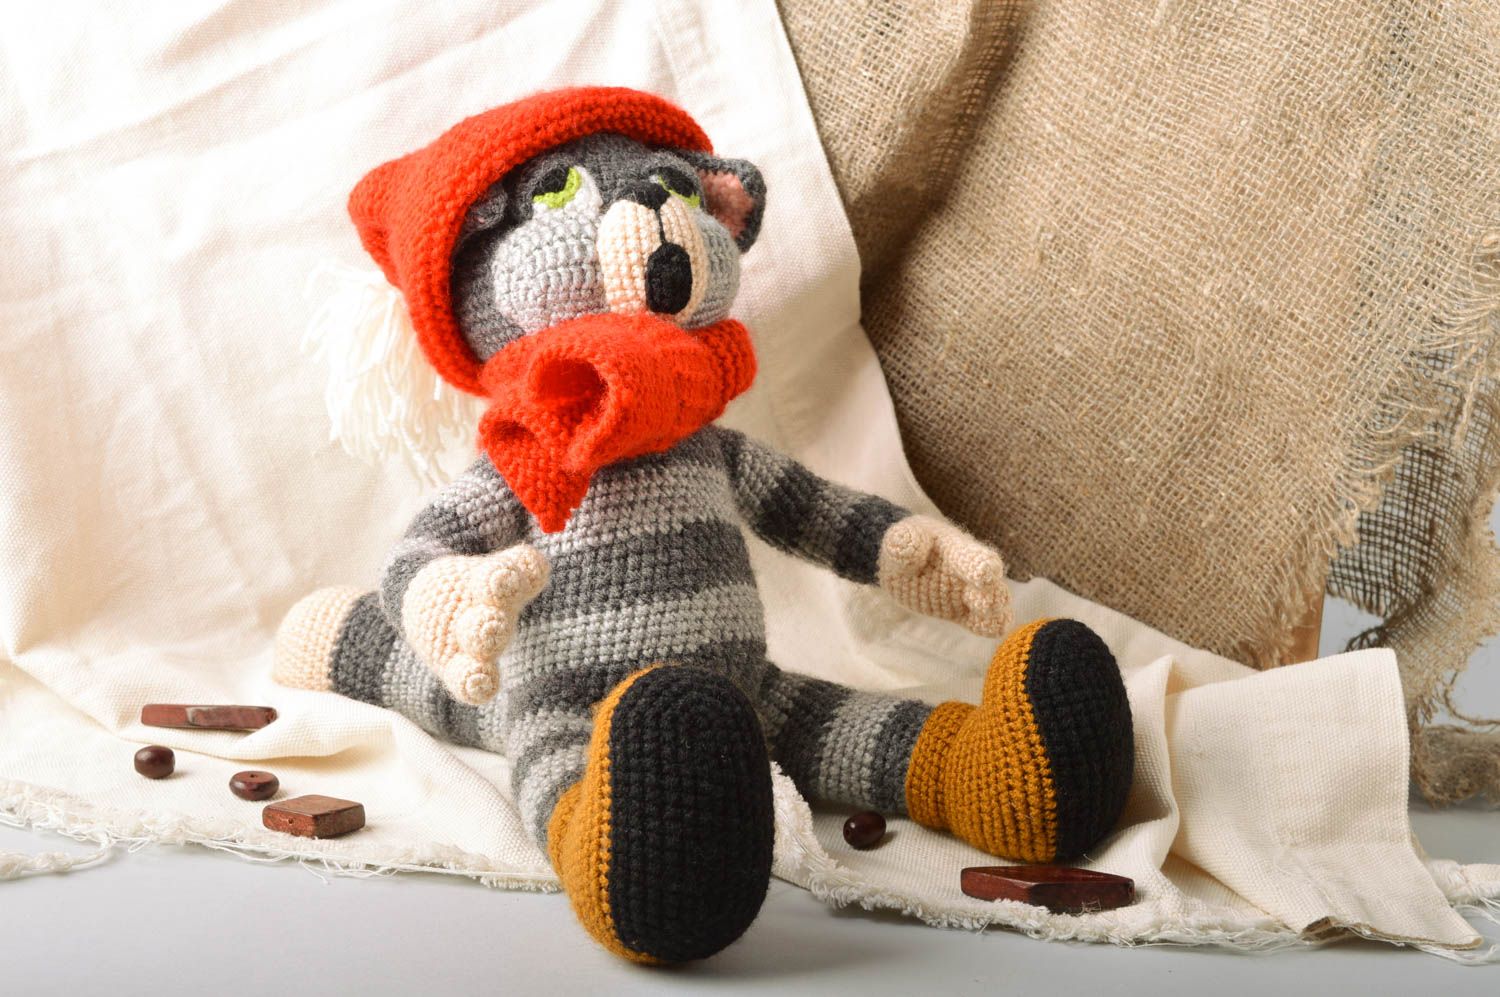 Handmade designer crochet toy striped gray cat in red hat and scarf photo 1